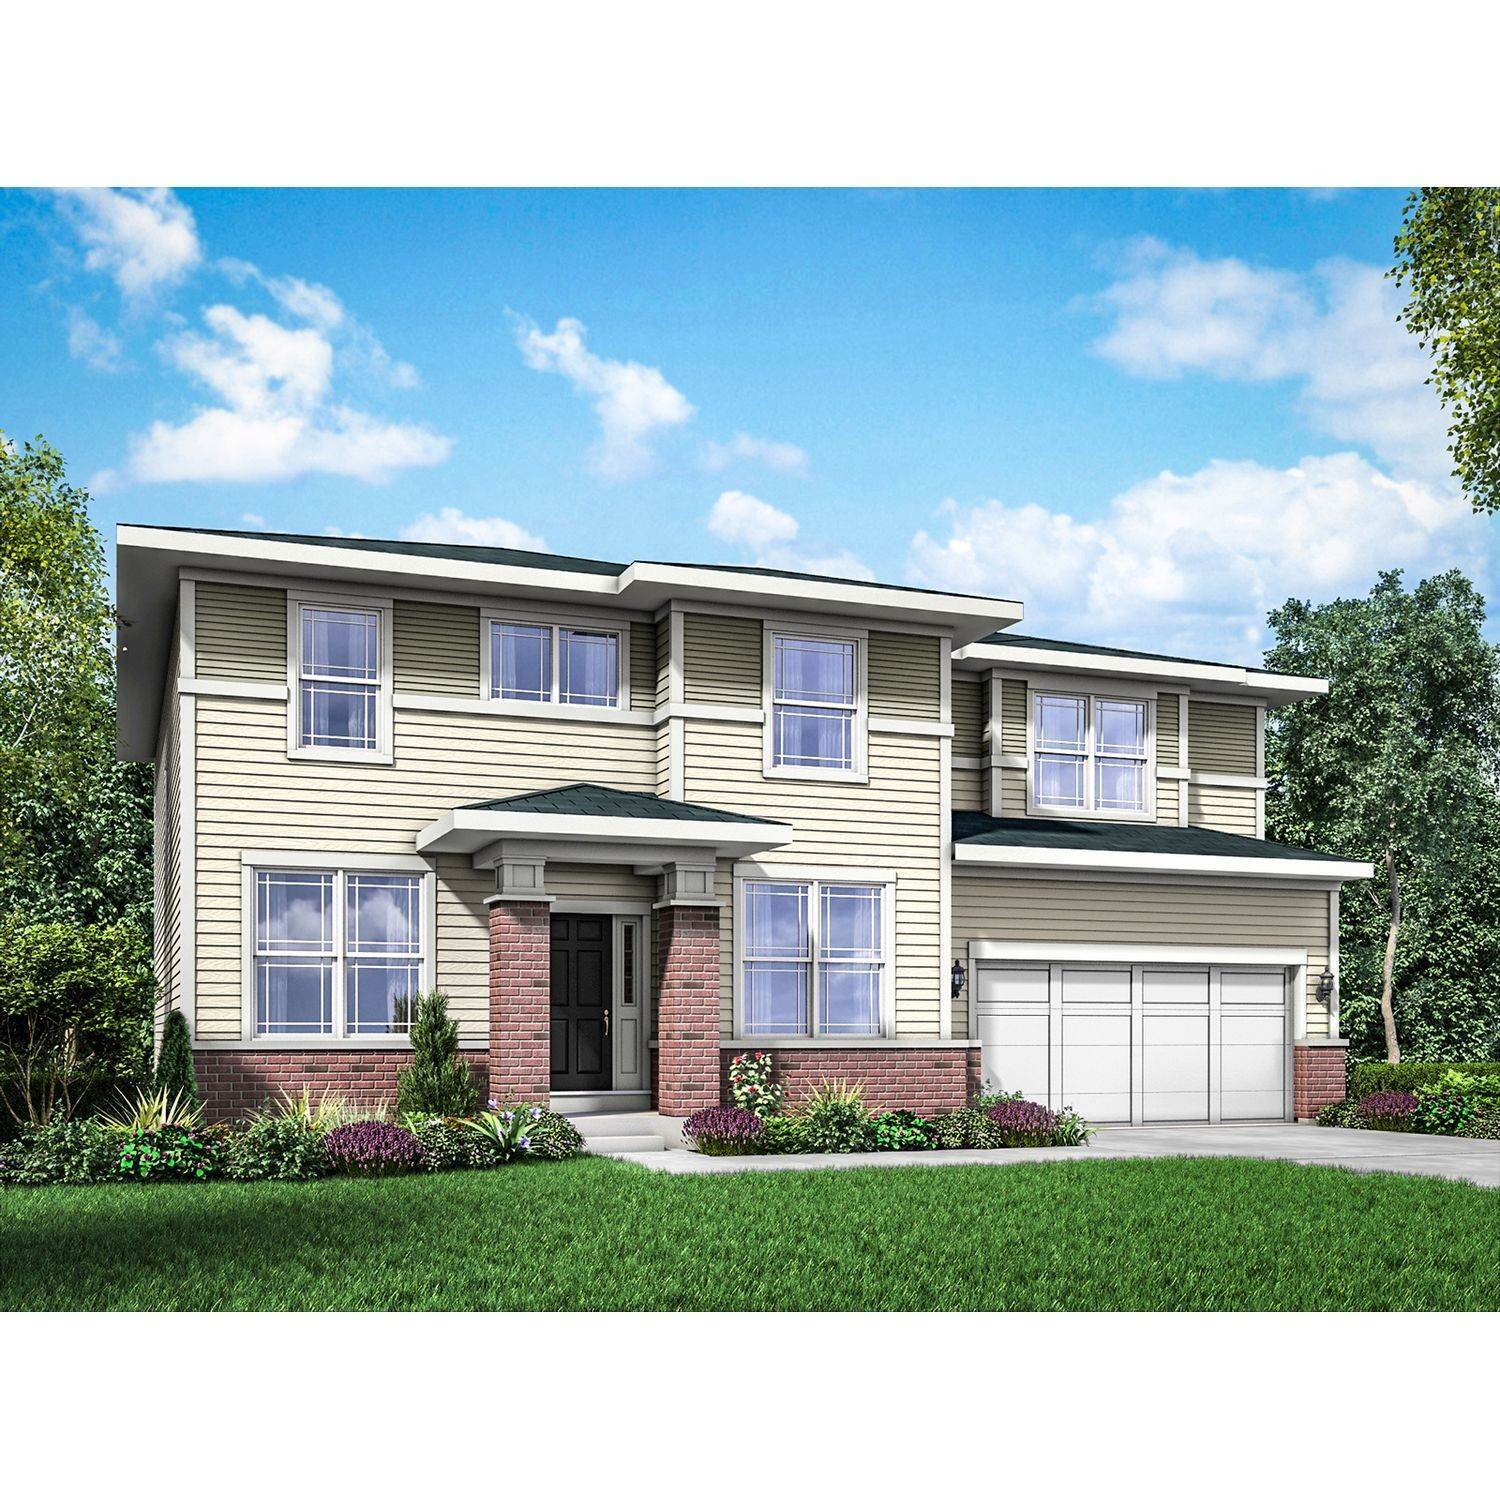 4. Single Family for Sale at Sun Prairie, WI 53590